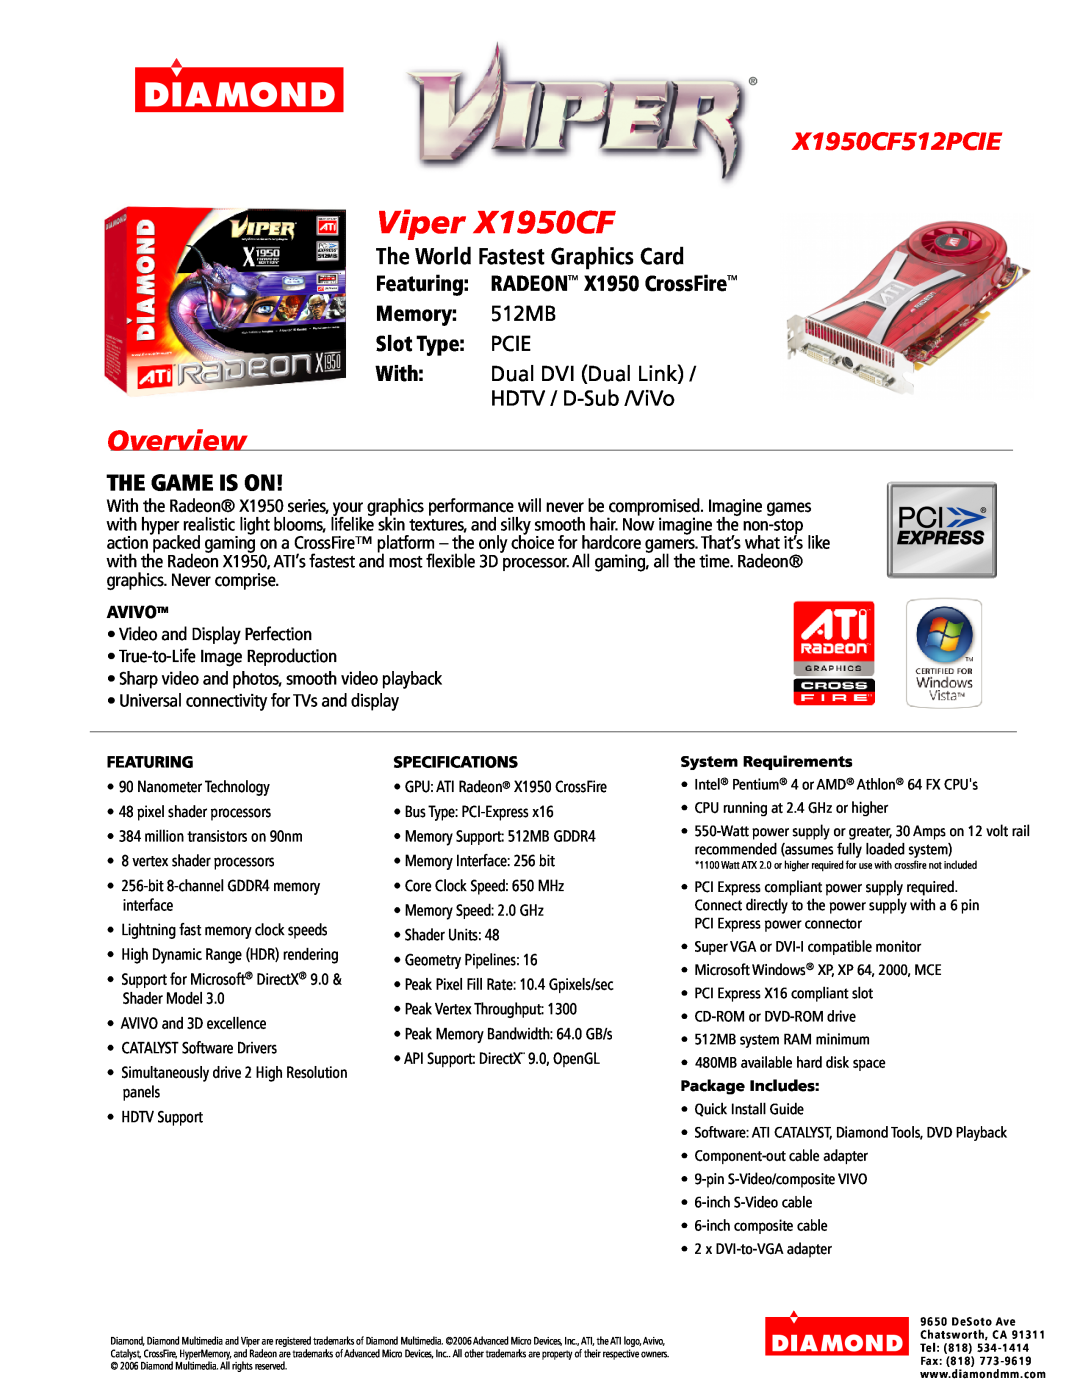 Diamond Multimedia X1950CF512PCIE specifications Viper X1950CF, Overview, The World Fastest Graphics Card, The Game Is On 